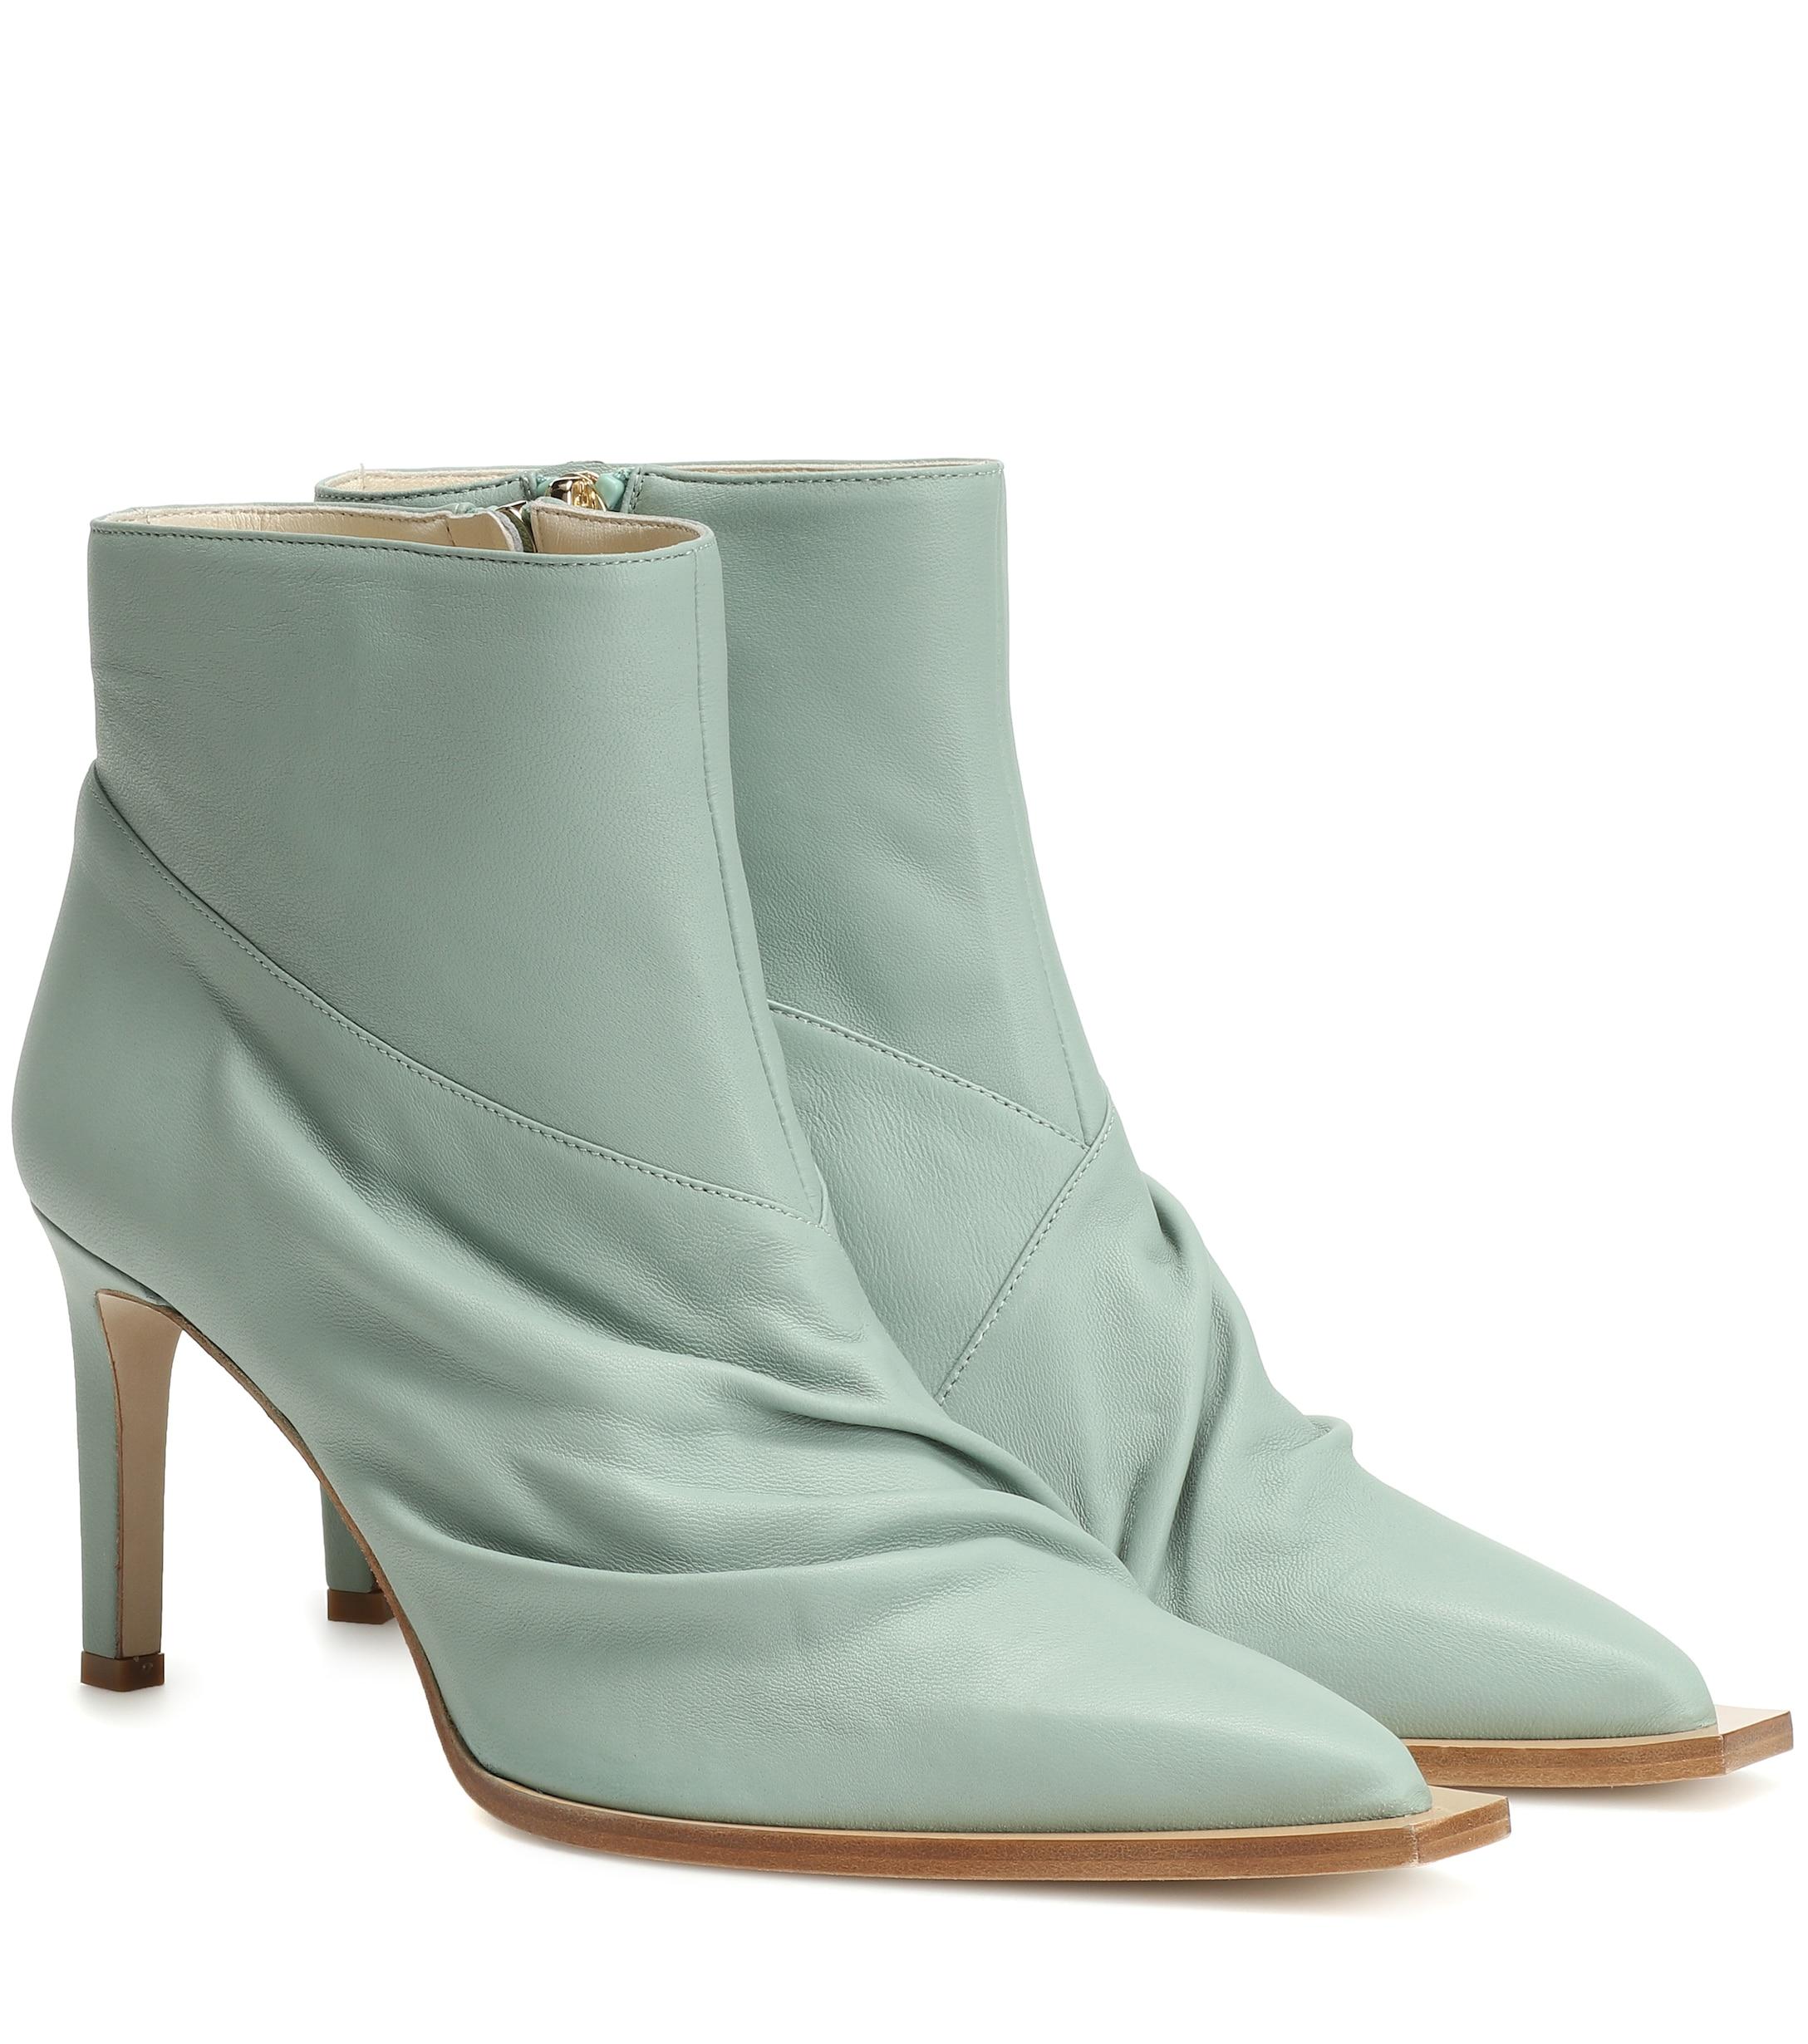 Tibi Cato Leather Ankle Boots in Green - Lyst